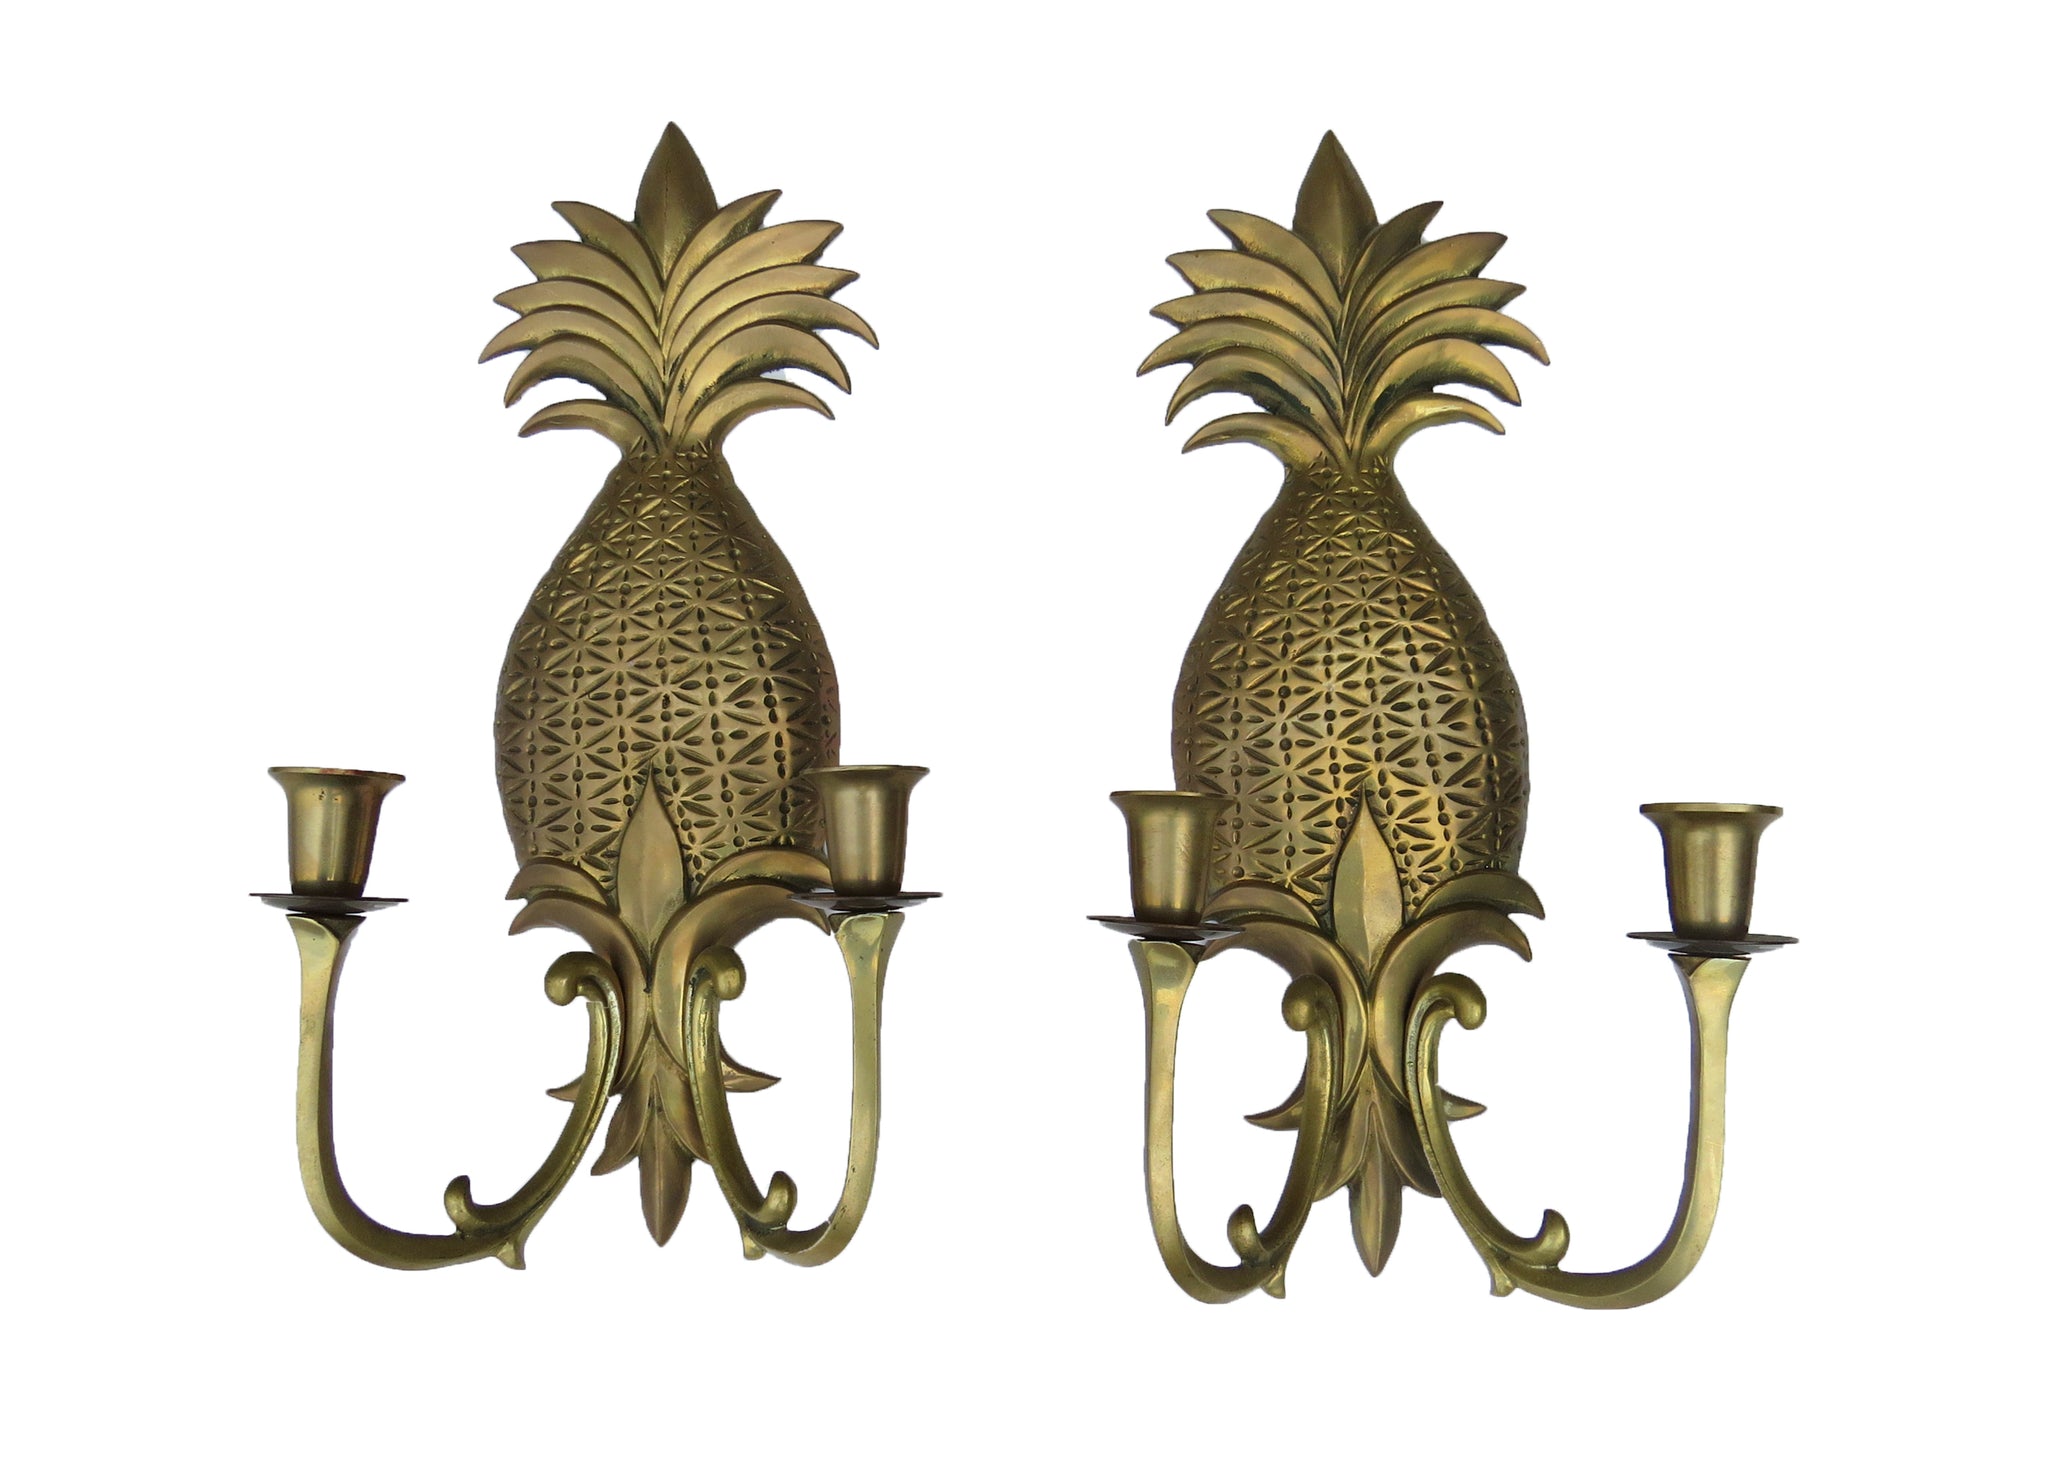 edgebrookhouse - Vintage Solid Brass Double Arm Pineapple Candle Wall Sconces - a Pair